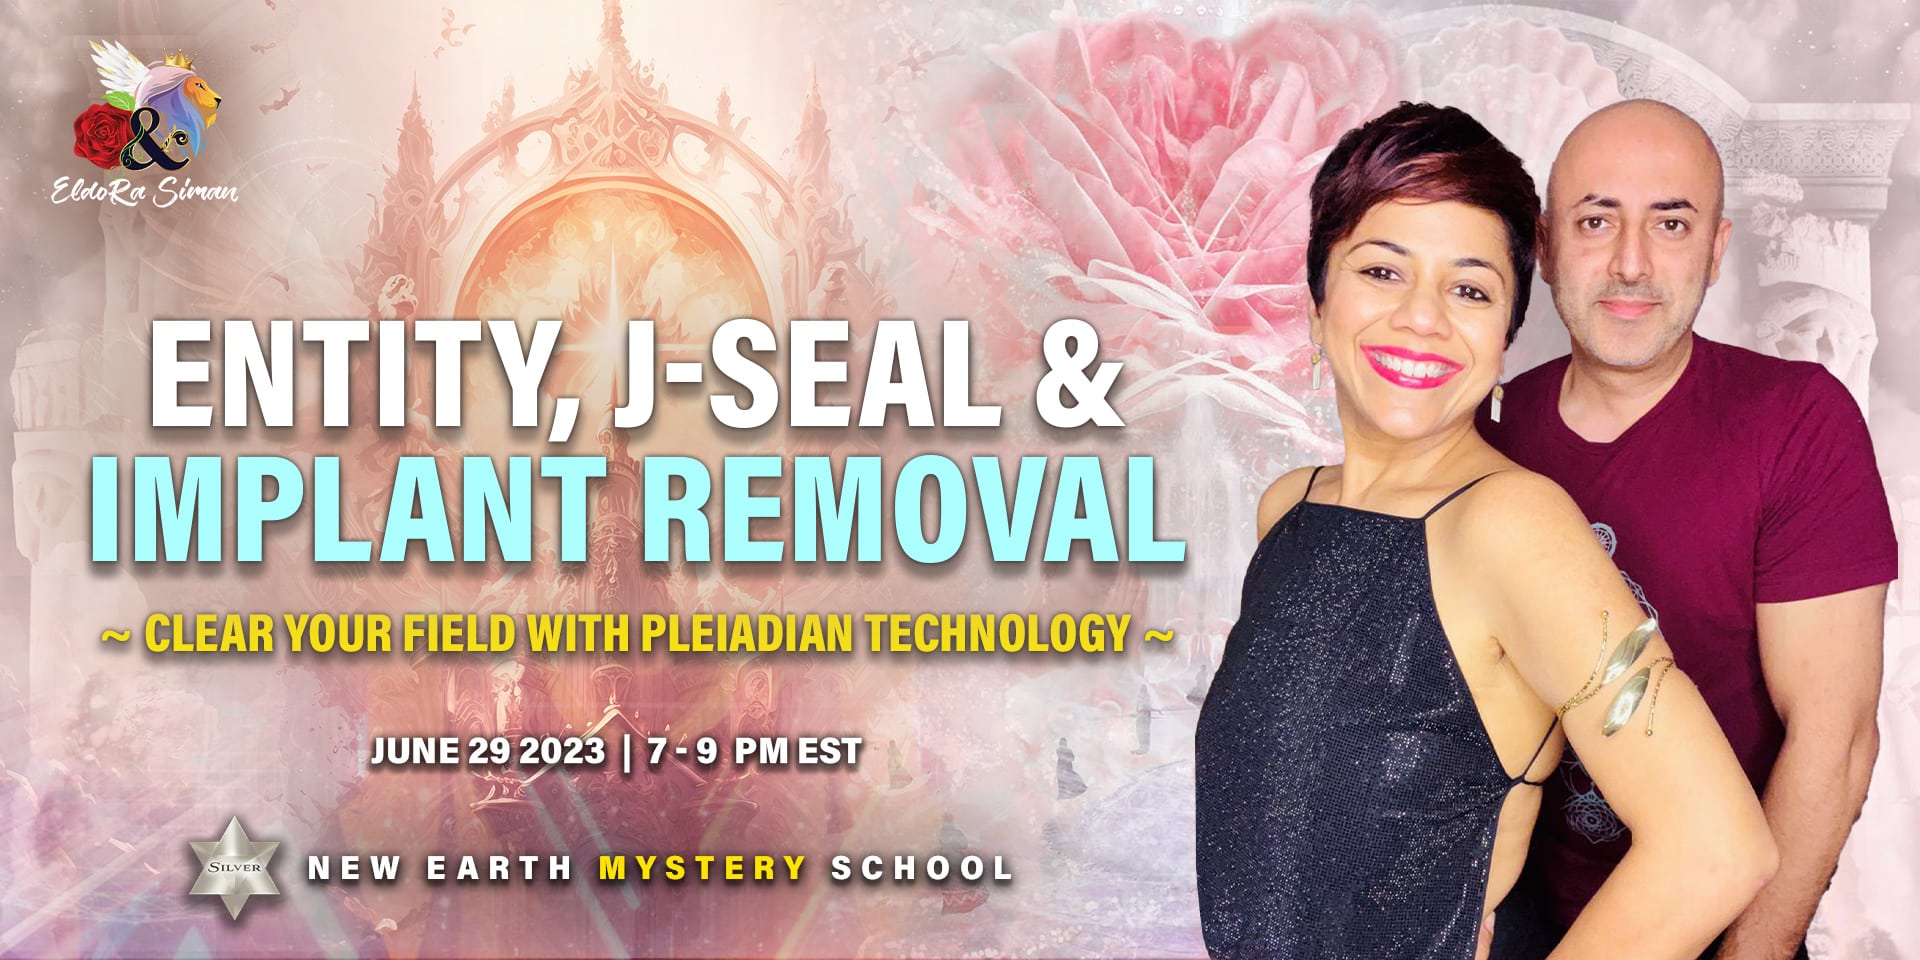 entity, j-seal & implant removal